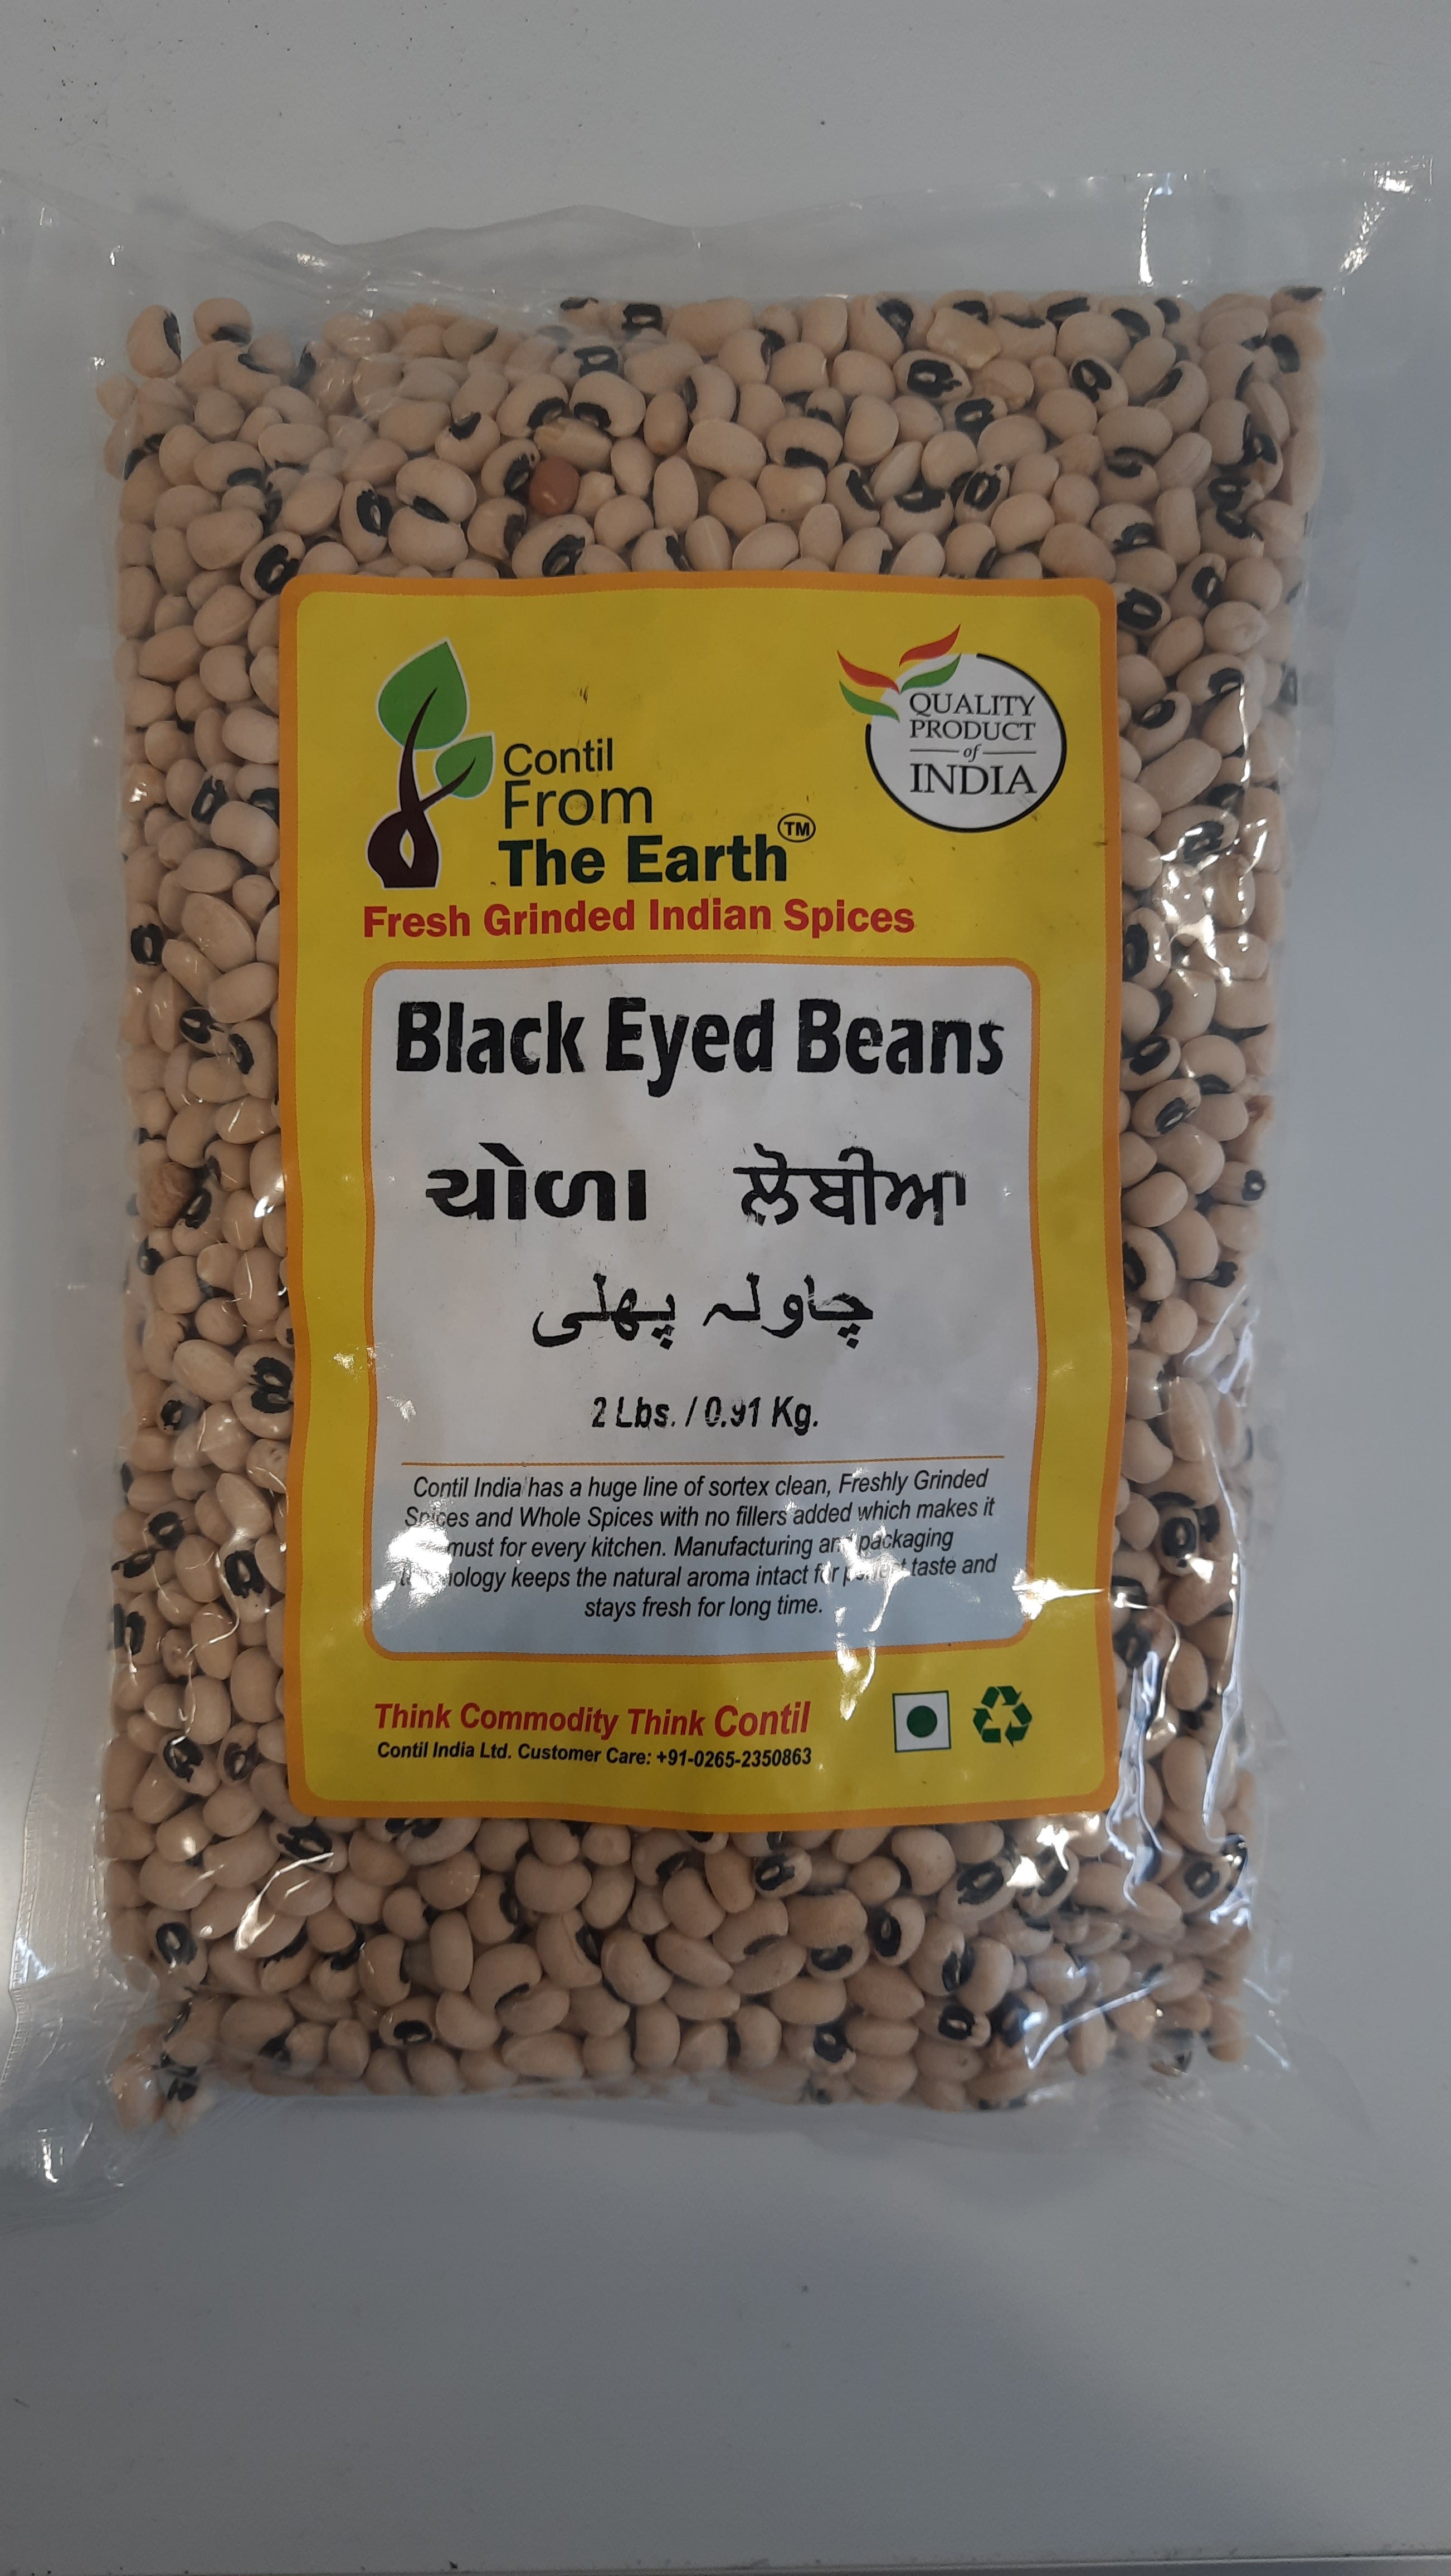 From the Earth - Black Eyed Beans 2lb